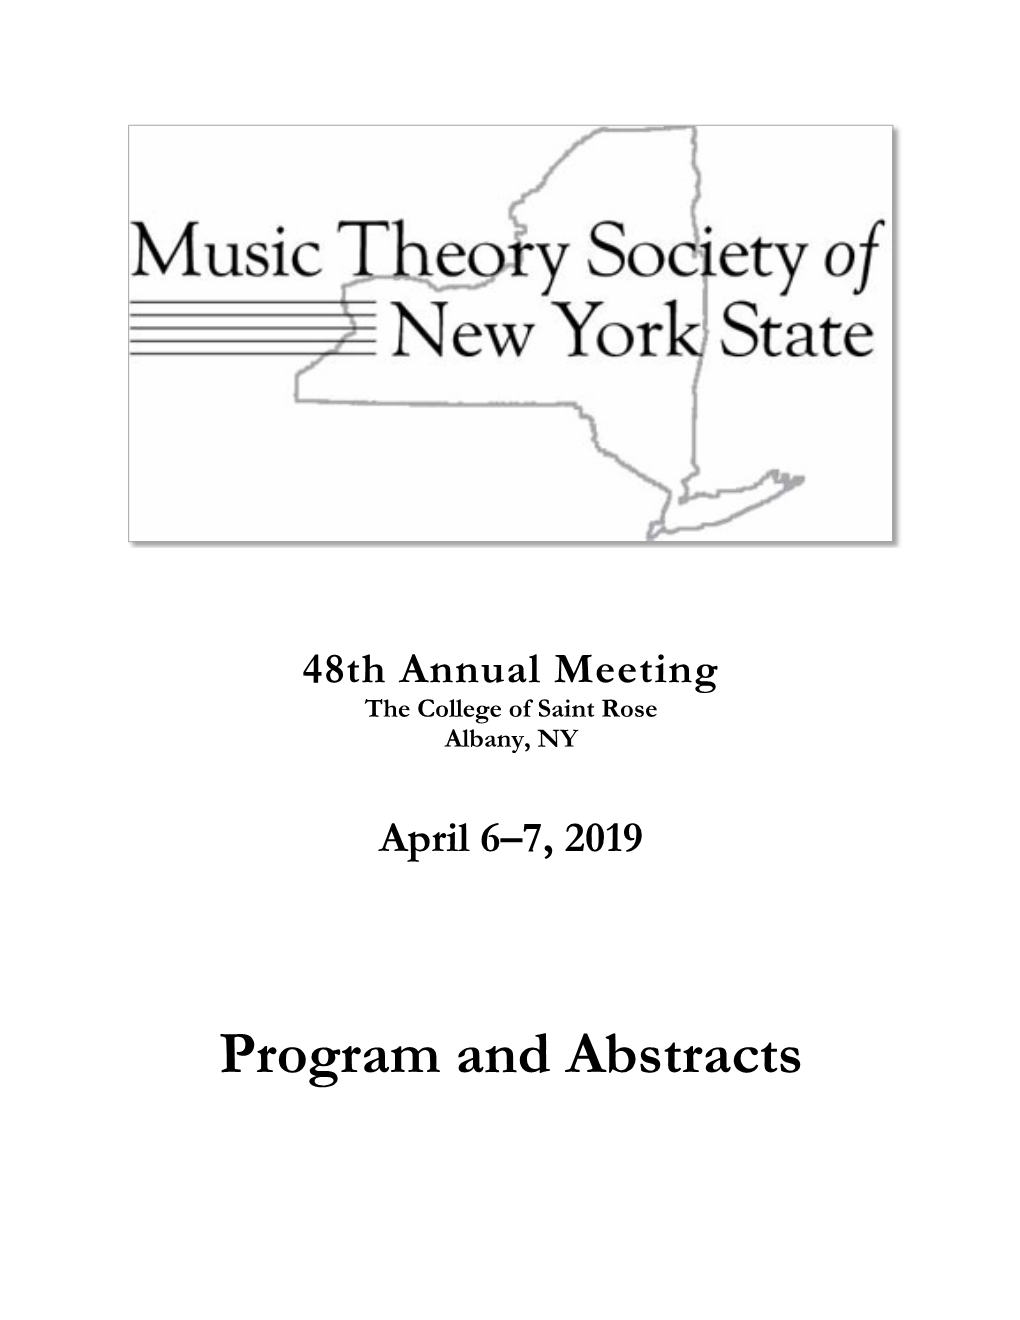 Program and Abstracts for 2019 Meeting